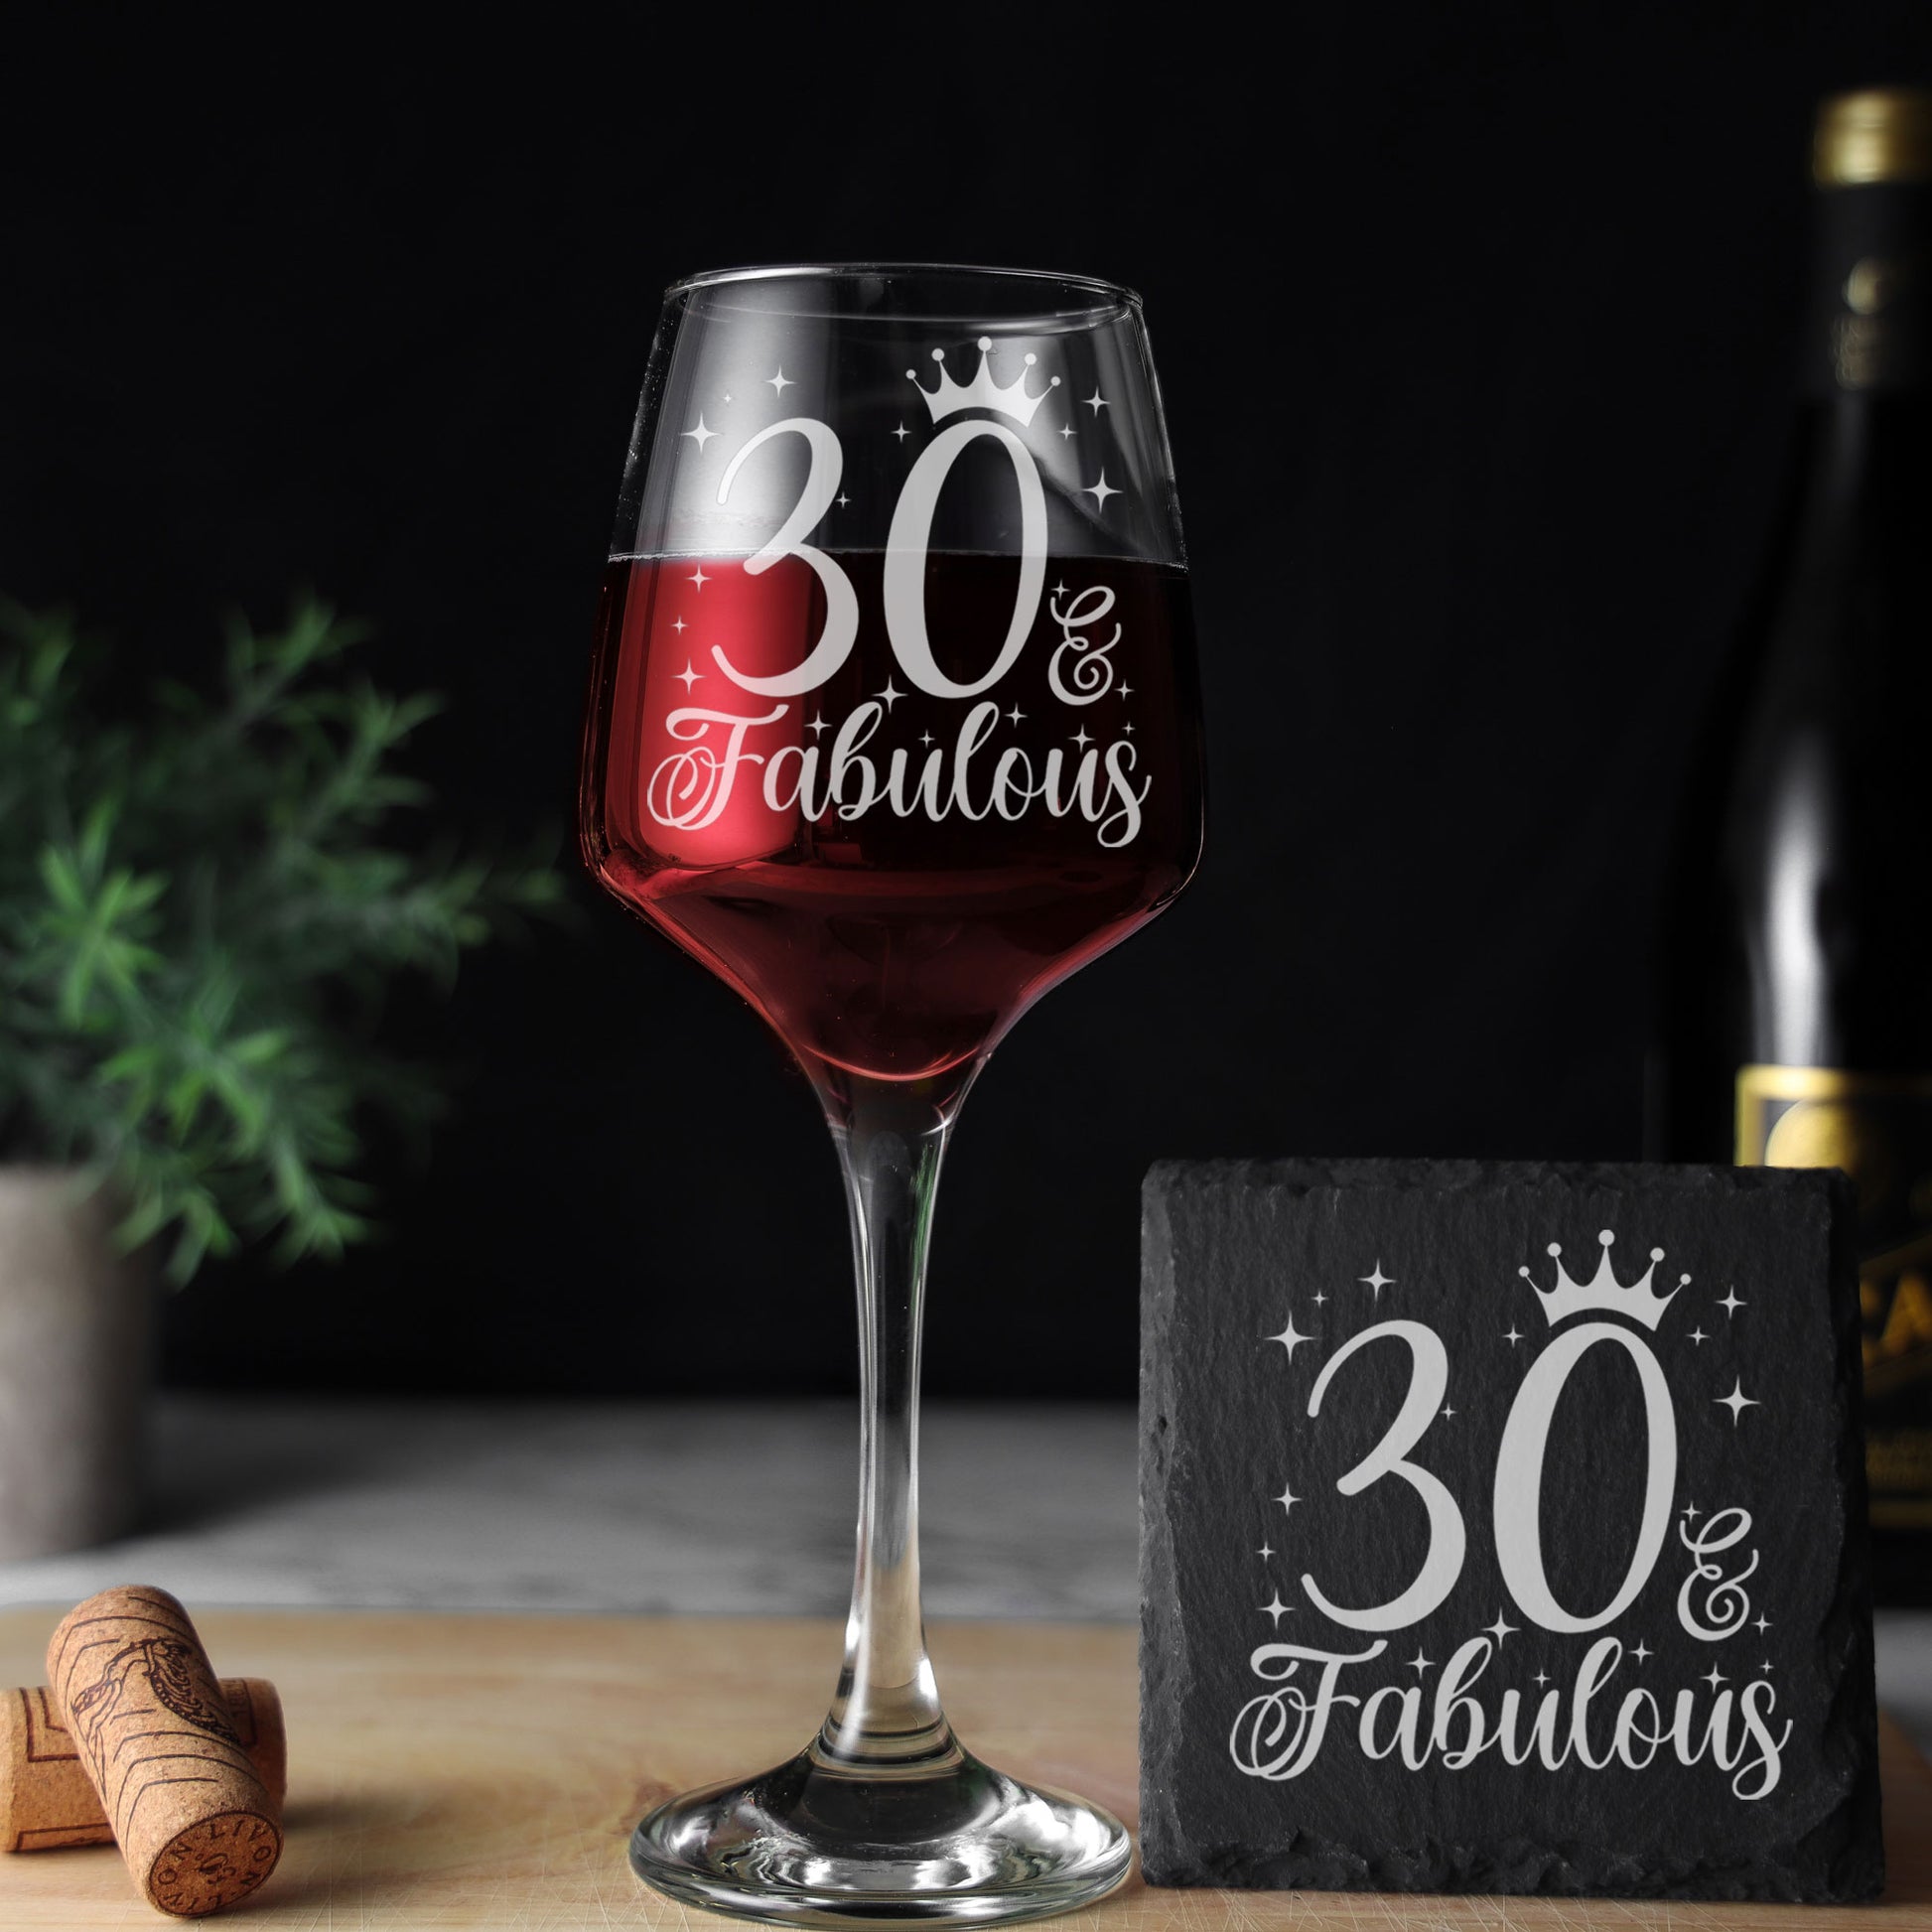 30 & Fabulous 30th Birthday Gift Engraved Wine Glass and/or Coaster Set  - Always Looking Good - Glass & Square Coaster  